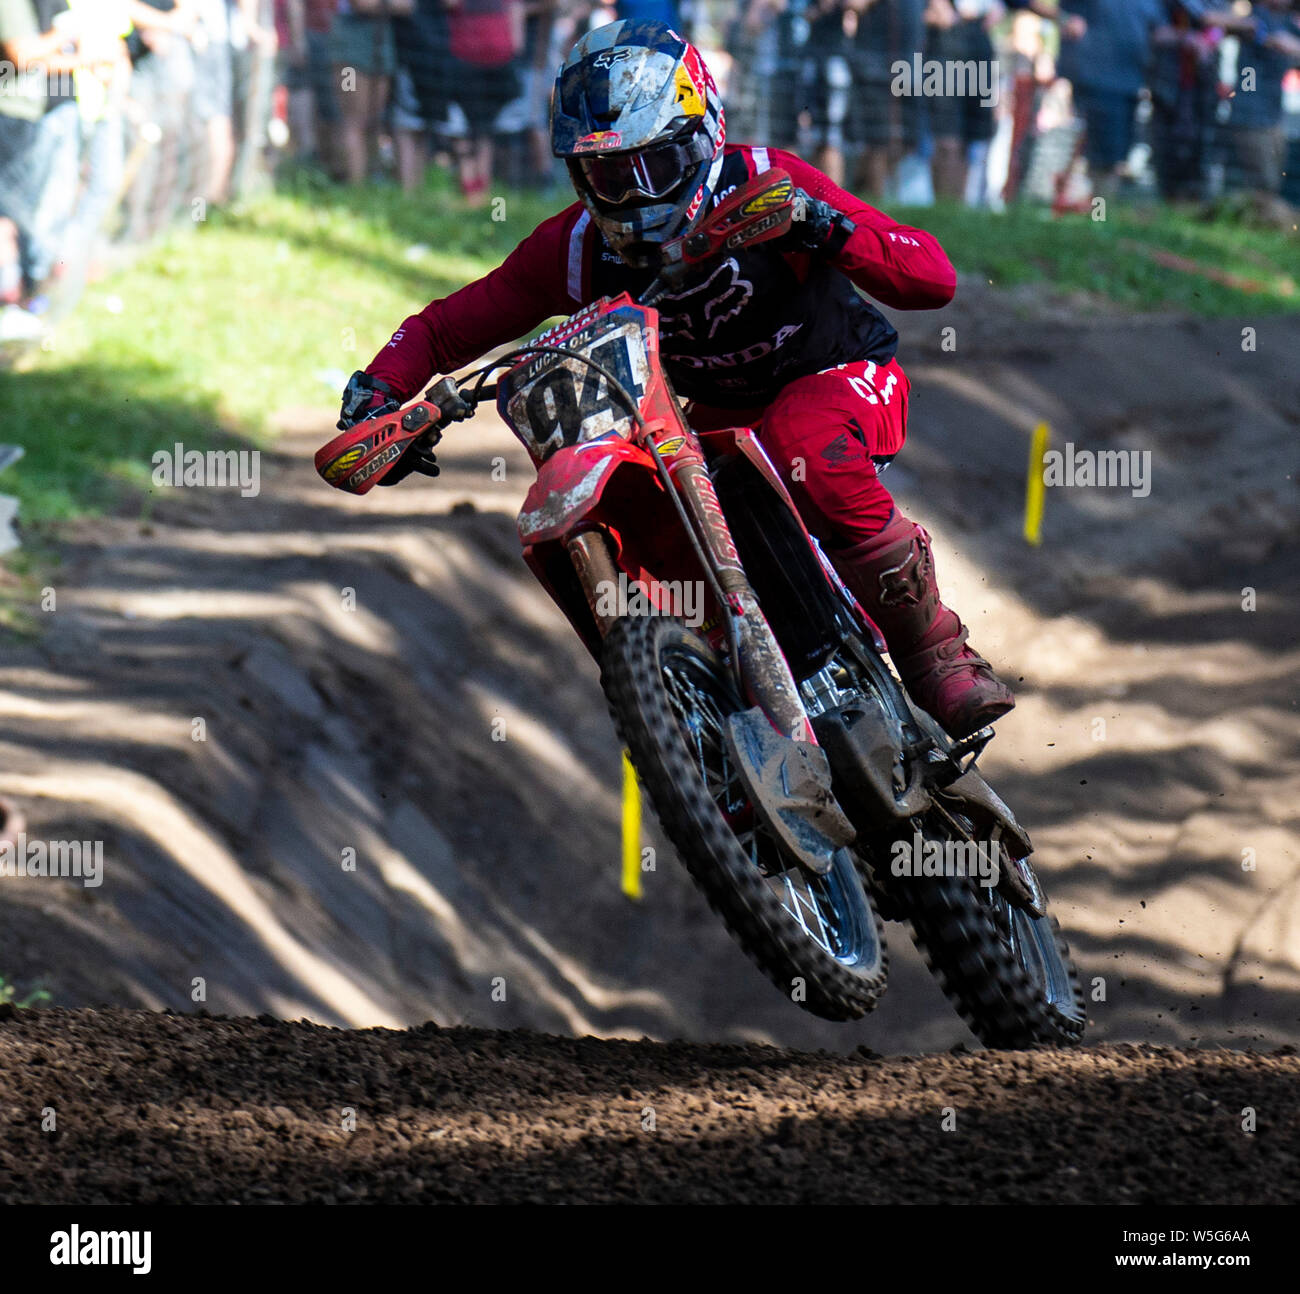 Washougal, WA USA. 27th July, 2019. # 94 Ken Roczen coming out of turn 17 during the Lucas Oil Pro Motocross Washougal National 450 class championship at Washougal MX park Washougal, WA Thurman James/CSM/Alamy Live News Stock Photo